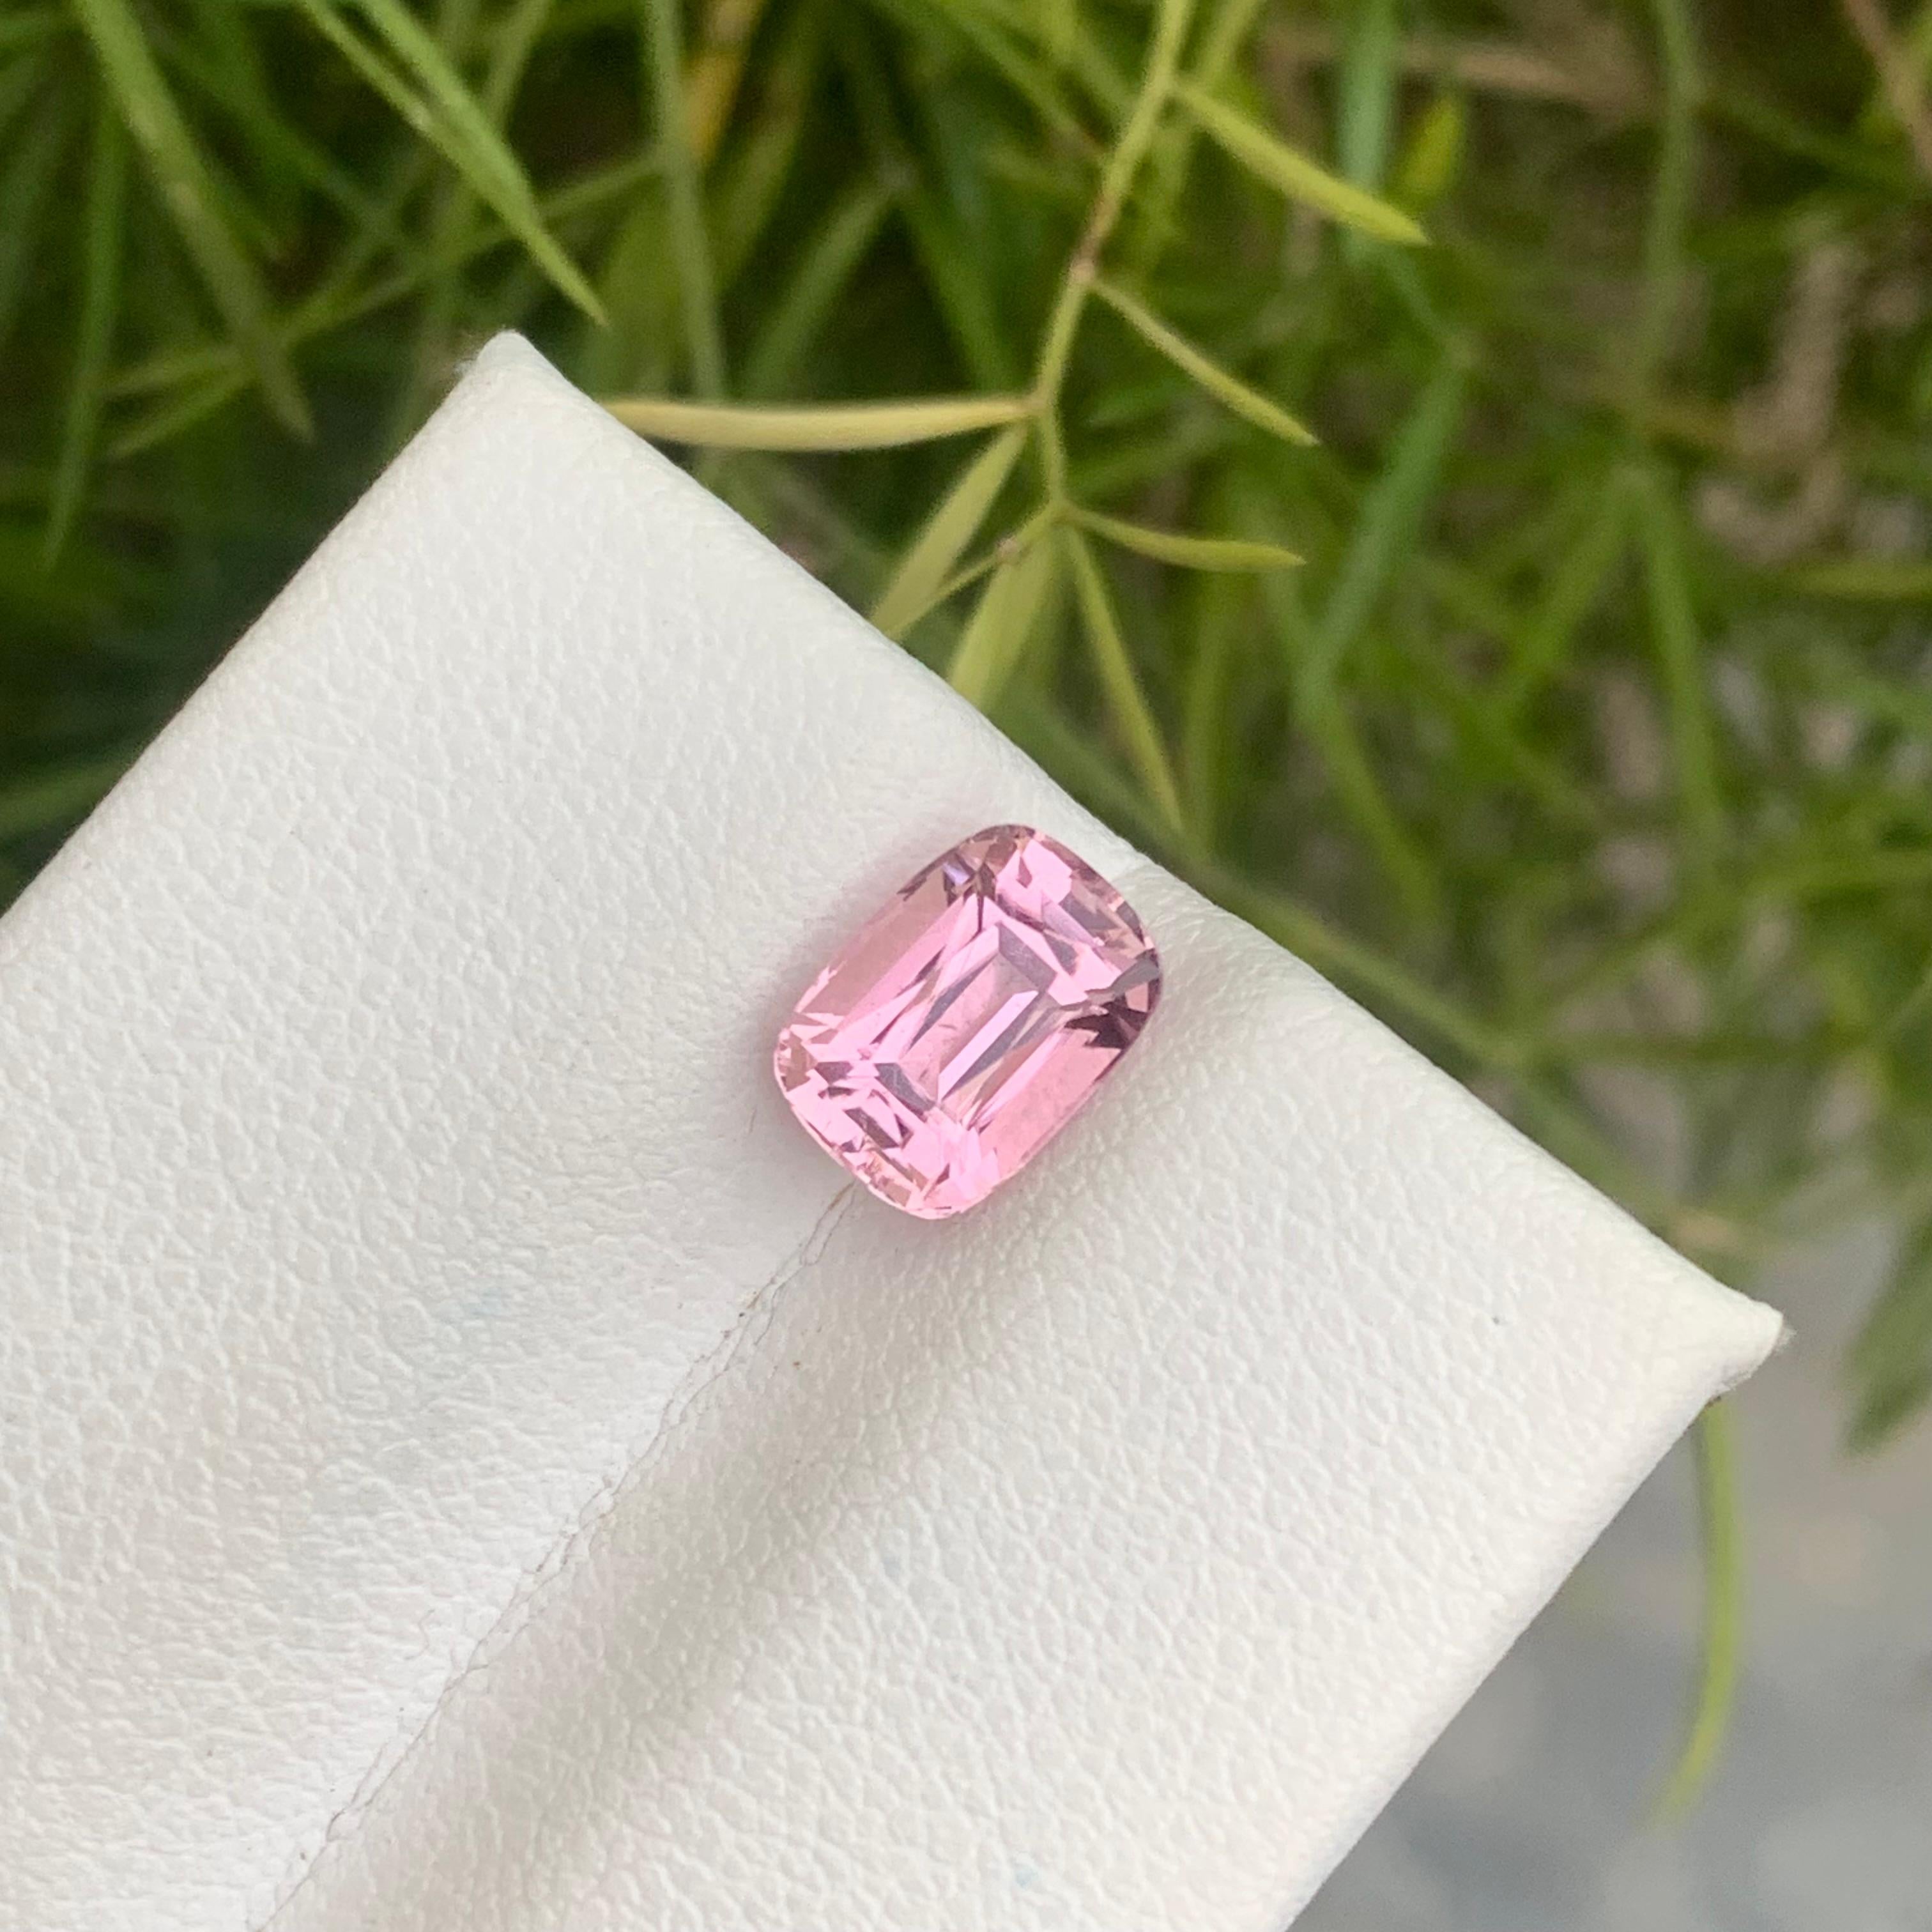 Faceted Tourmaline
Weight: 1.70 Carats
Dimension: 7.9x5.8x4.9 Mm
Origin: Kunar Afghanistan
Color: Pink
Shape: Cushion
Clarity: Eye Clean
Certificate: On Demand

With a rating between 7 and 7.5 on the Mohs scale of mineral hardness, tourmaline